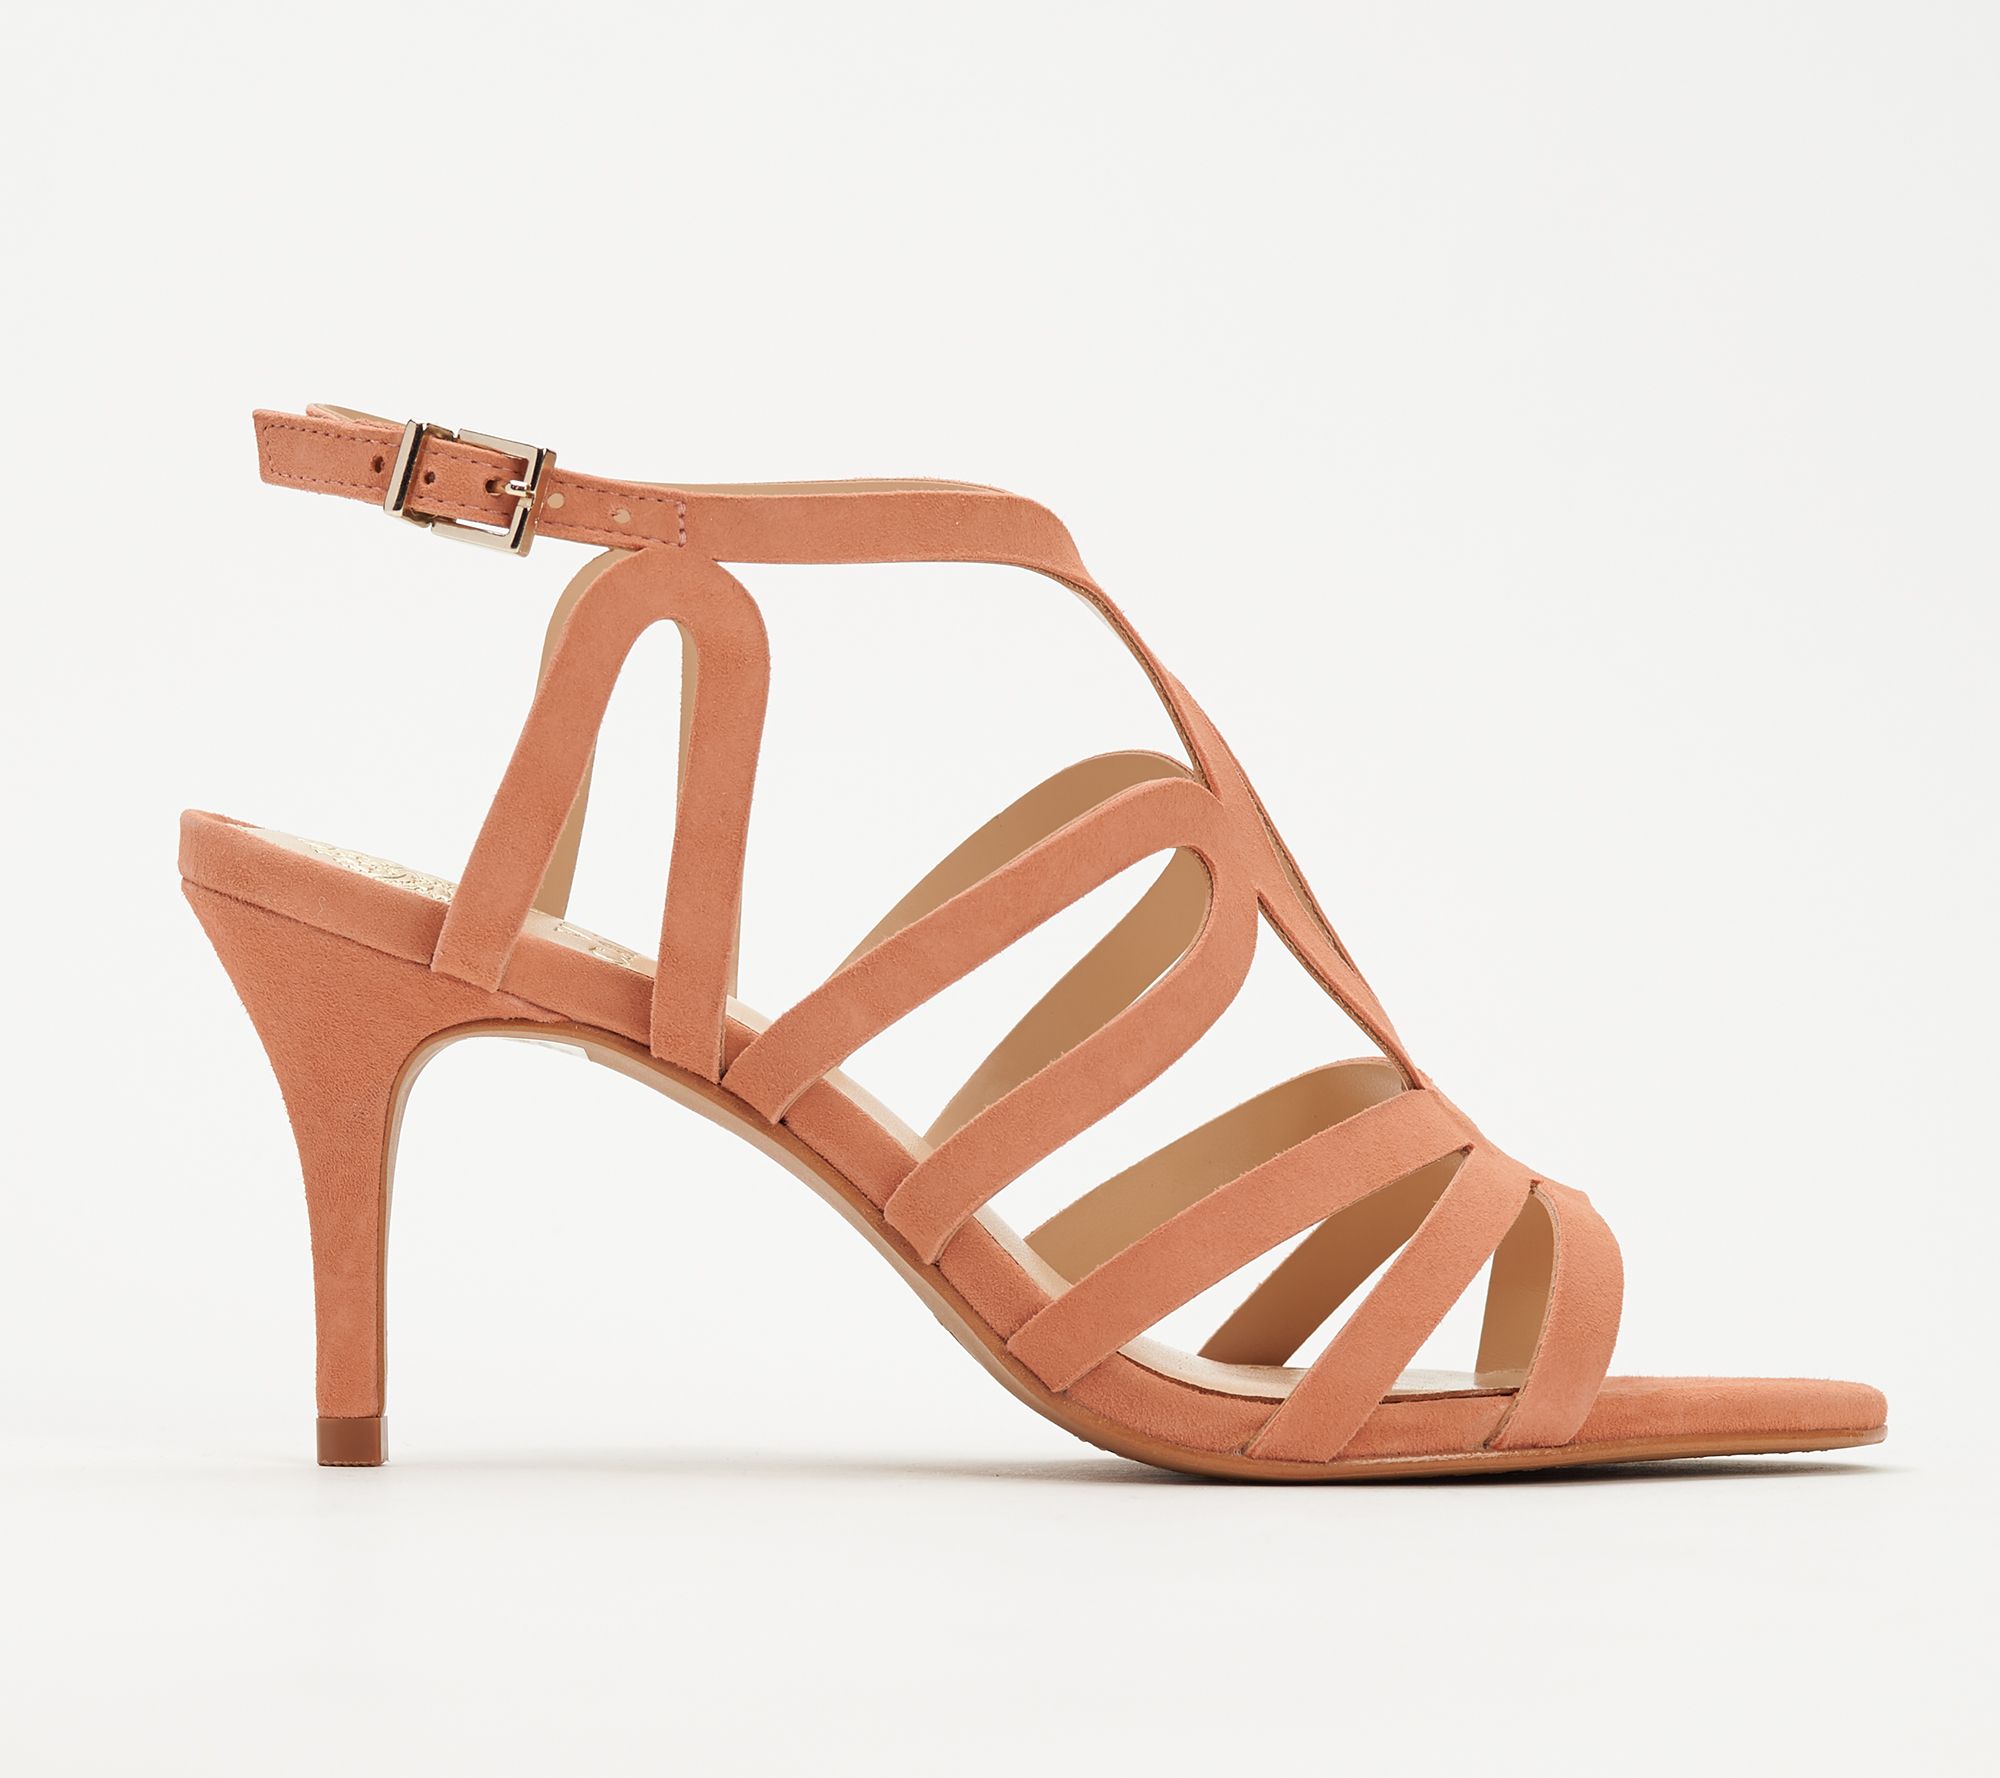 Vince Camuto Strappy Heeled Sandals- Peyson - QVC.com